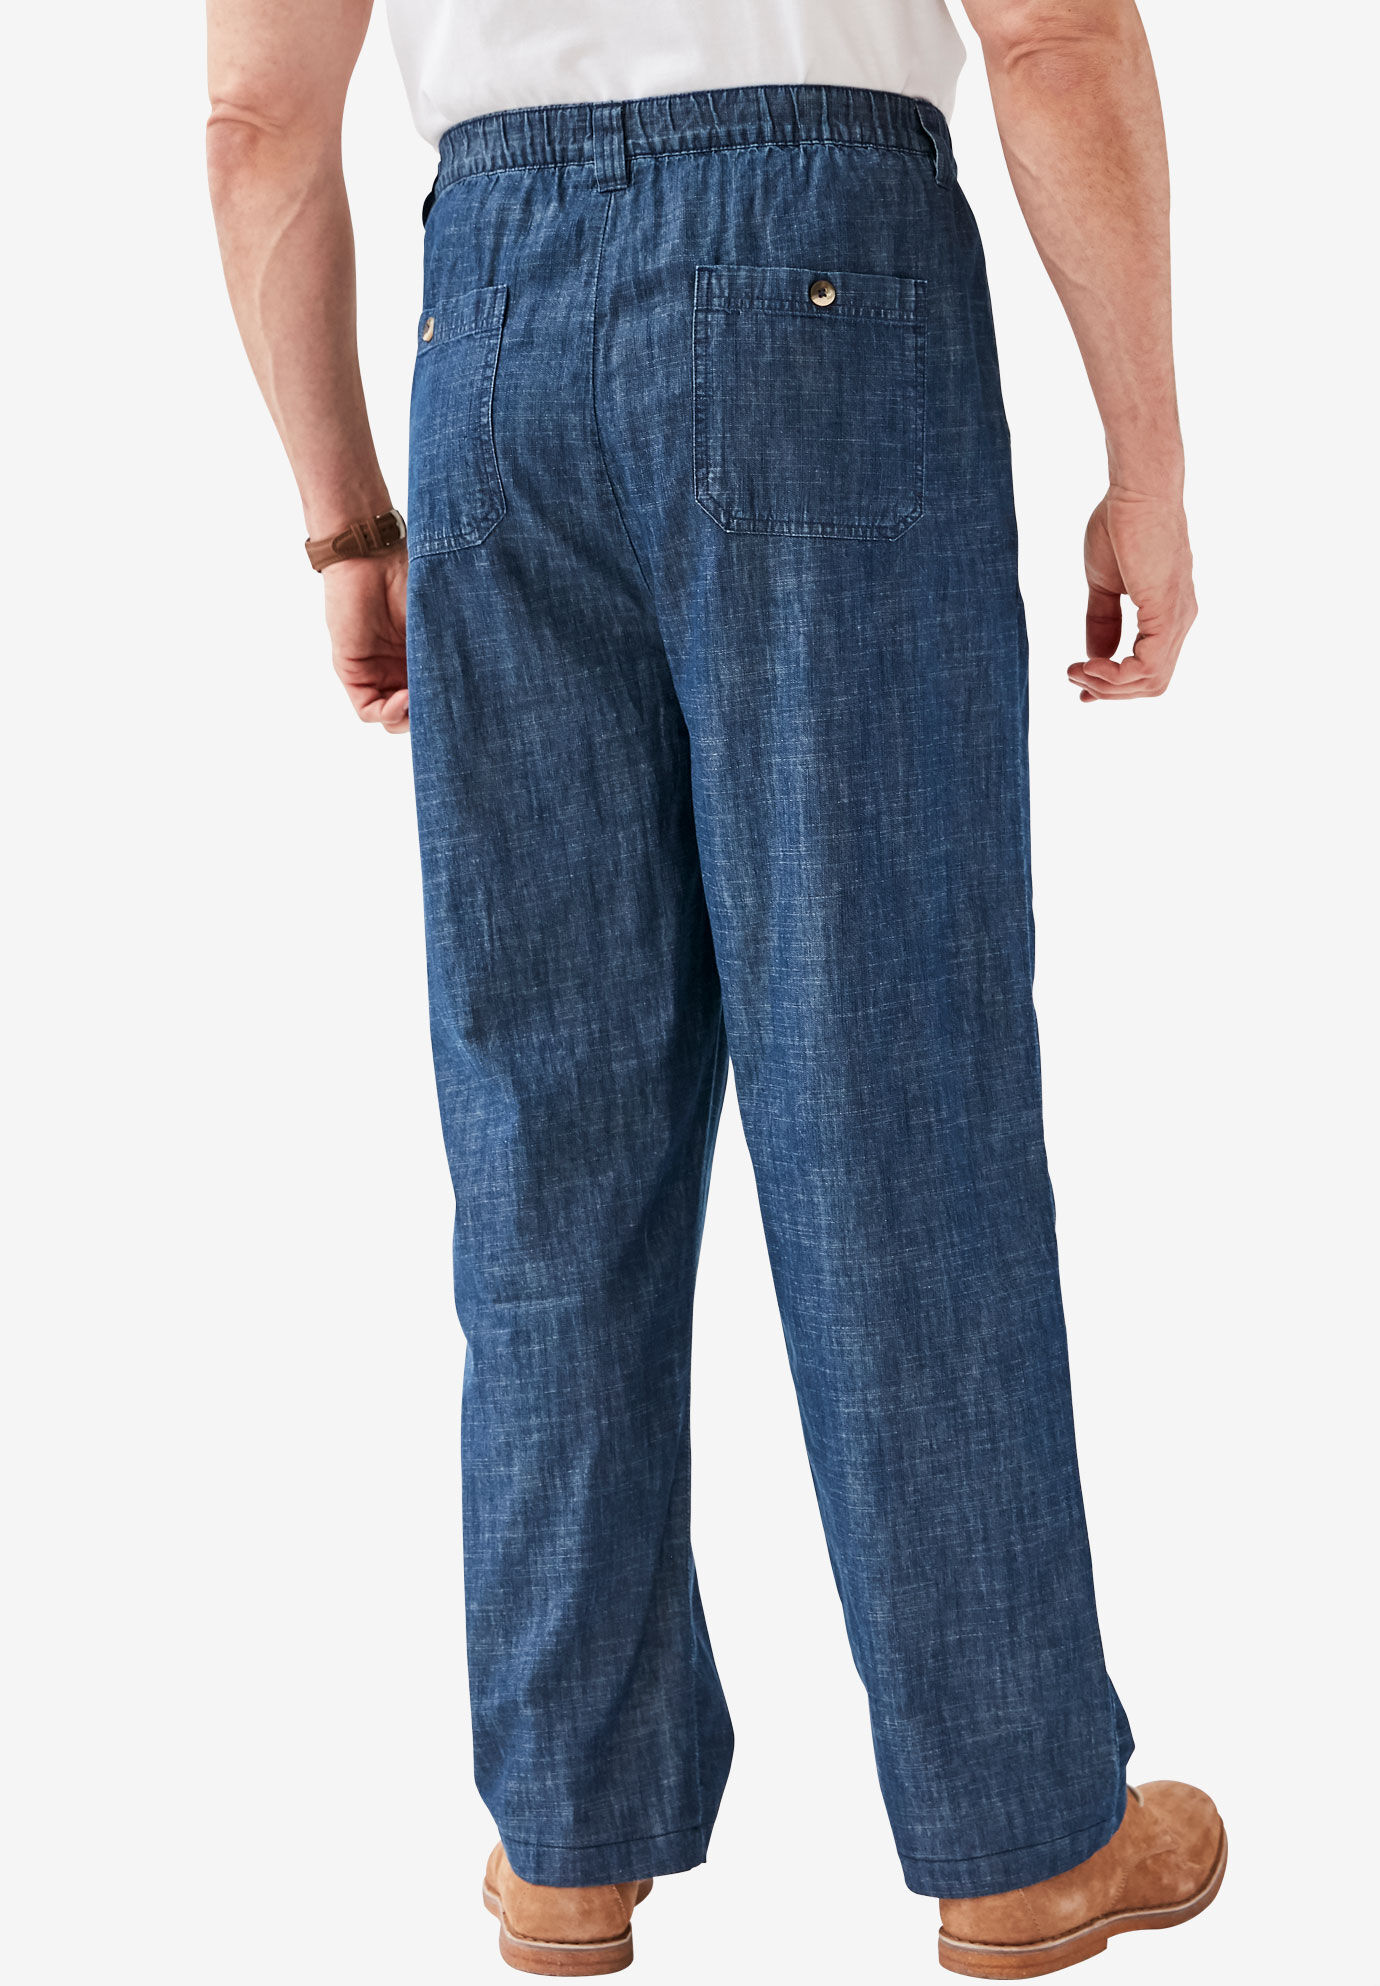 mens jeans with elastic back waist